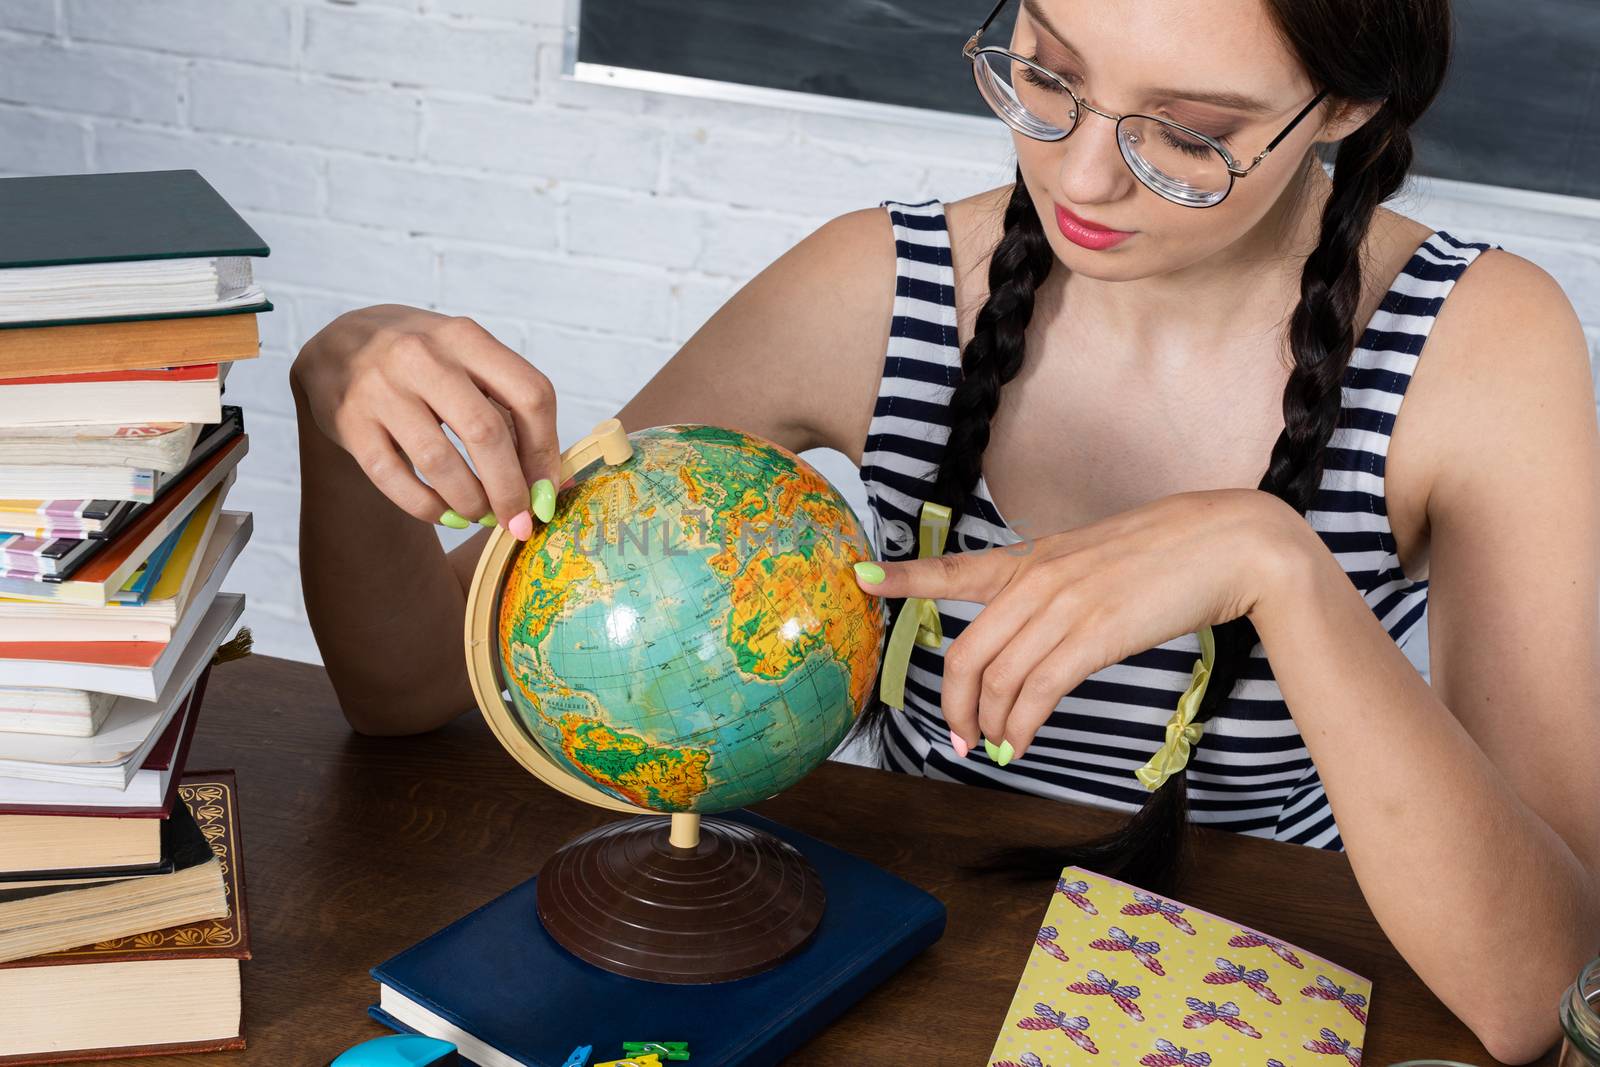 During a geography lesson, a teenager watches the globe and quietly plans her summer travels. A young girl with glasses sits at a desk at school. by fotodrobik